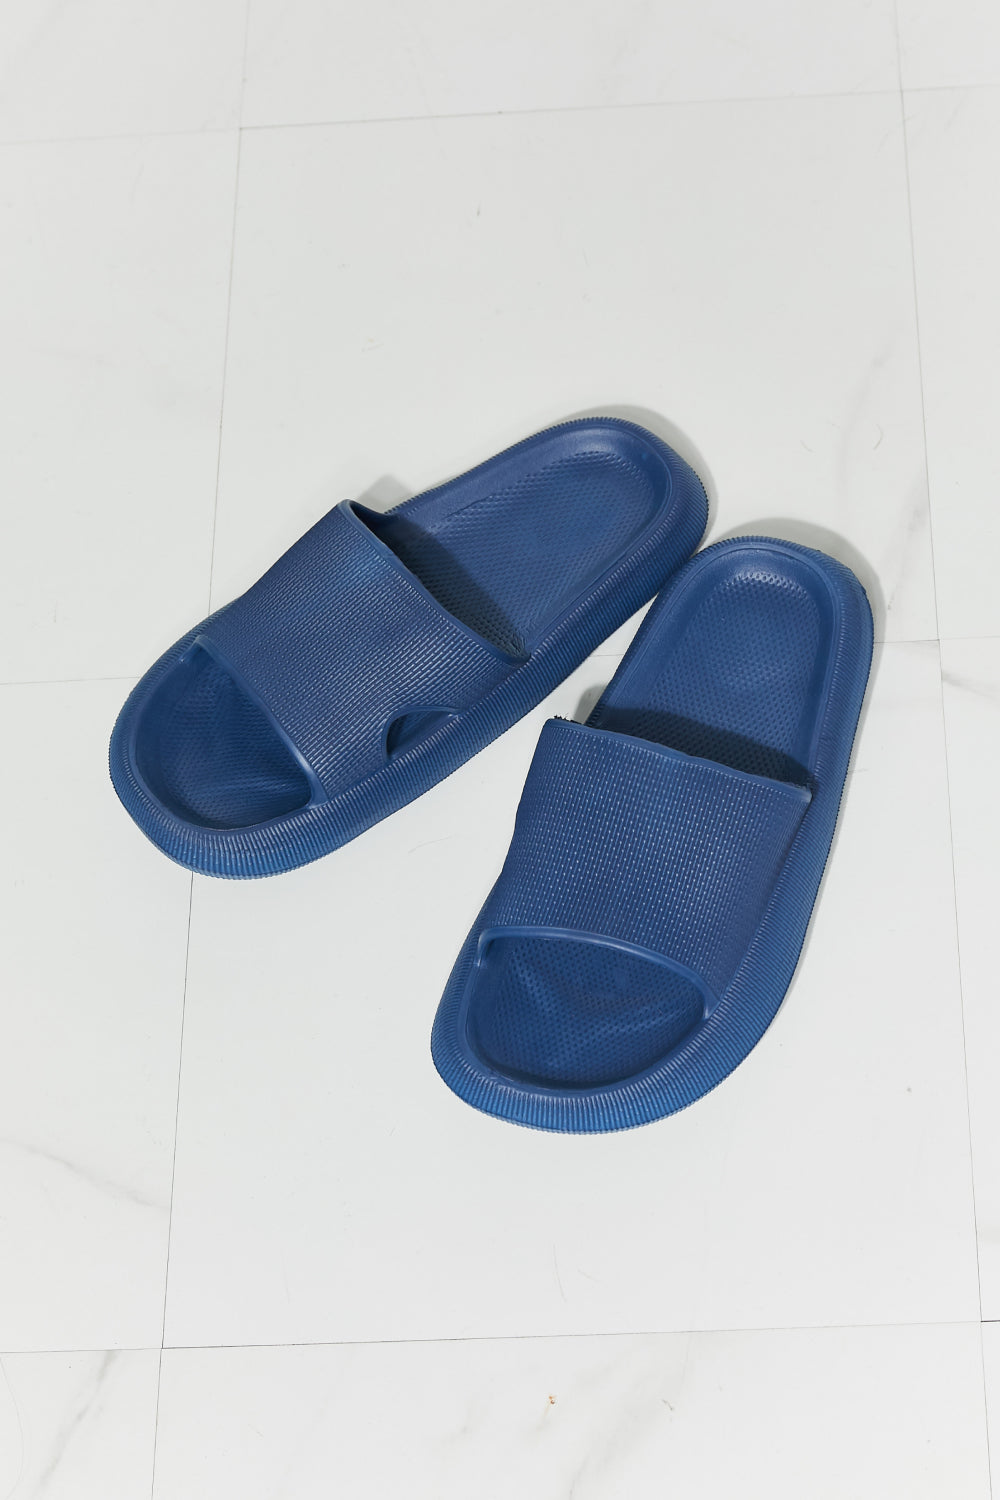 Arms Around Me Open Toe Slide in Navy  Southern Soul Collectives 